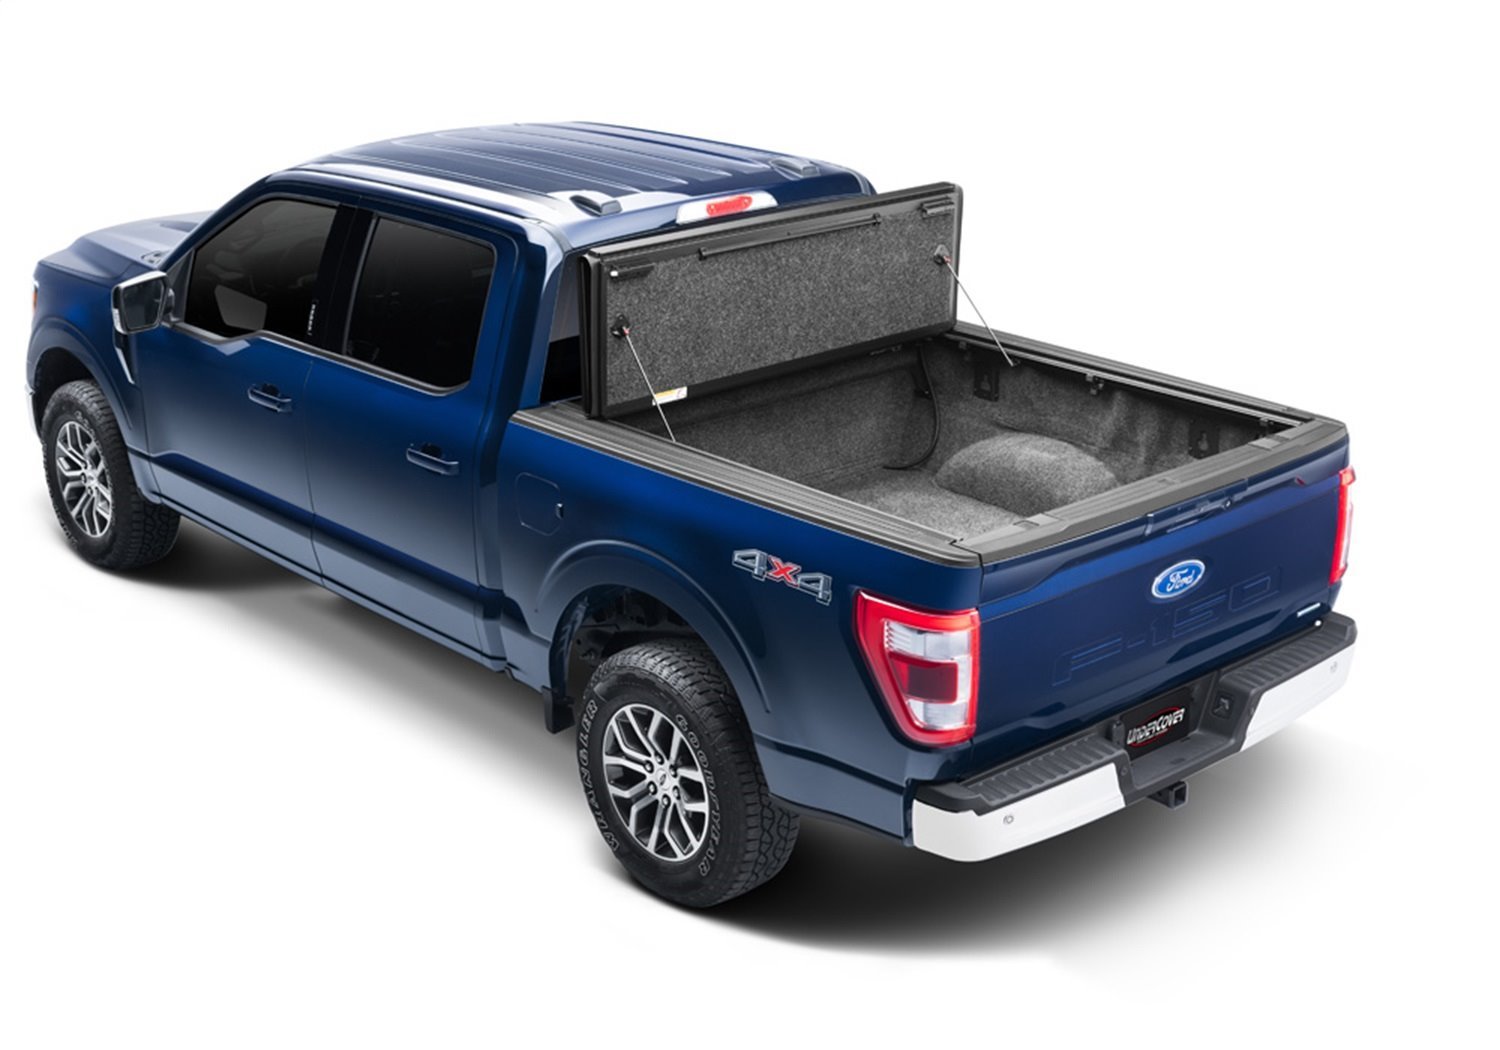 UX22031 Ultra Flex Hard Folding Cover, Fits Select Ford F-150 8'2" Bed STD/EXT/Crew, Matte Black Finish